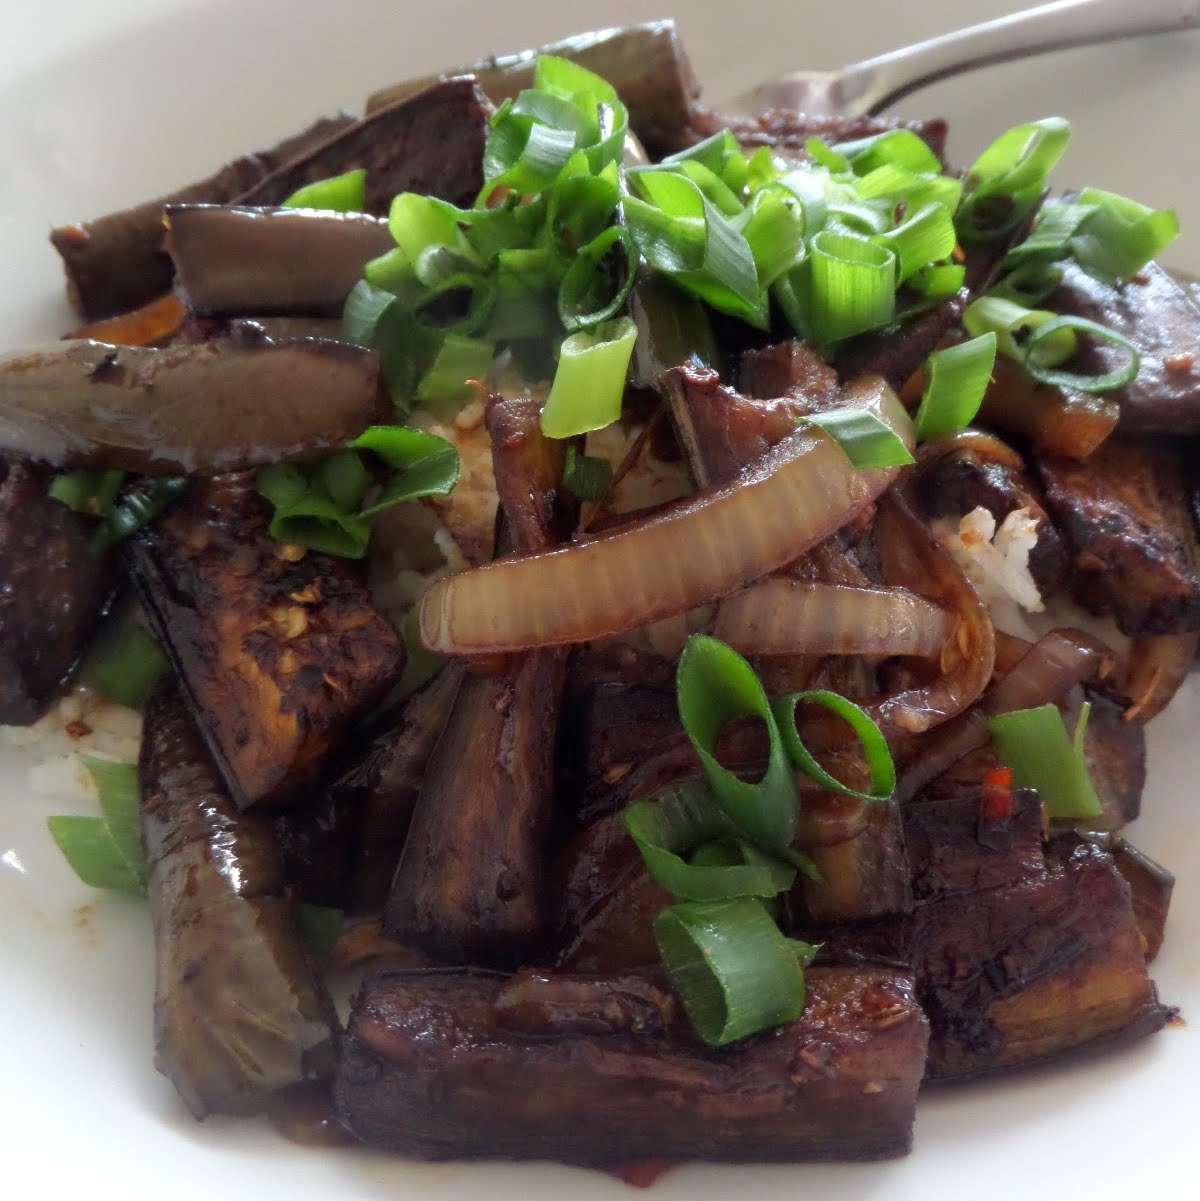 Szechuan Eggplant:  A quick and easy meatless stir fry made with eggplant, garlic, ginger, and soy sauce.  #meatless